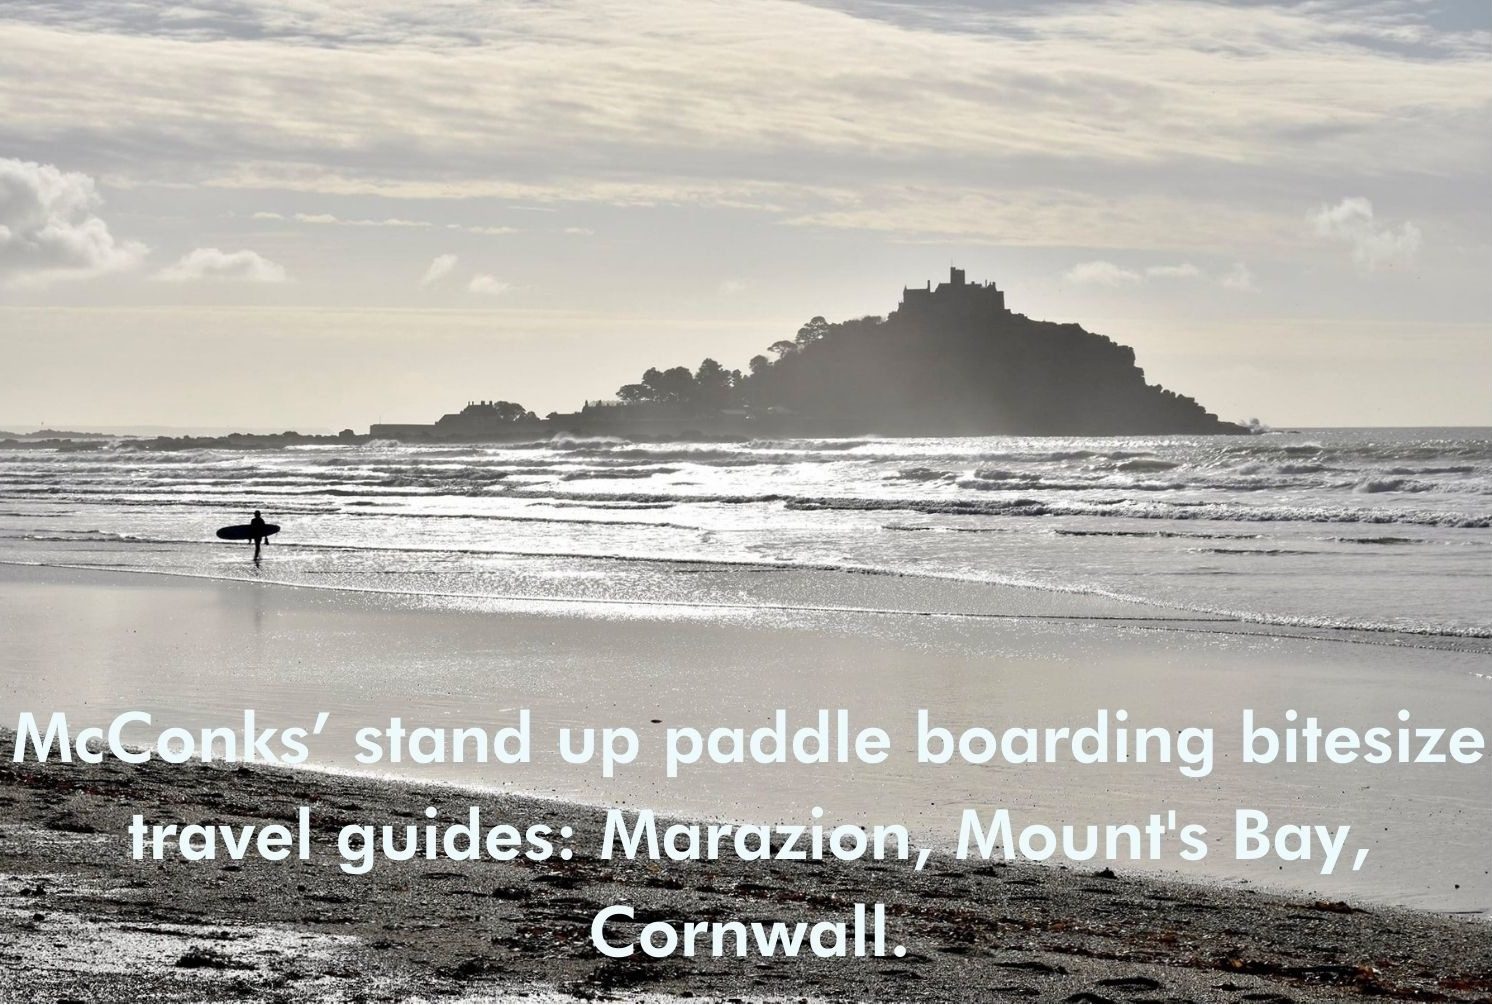 You are currently viewing McConks’ stand up paddle boarding bitesize travel guides: Marazion, Mount’s Bay, Cornwall.